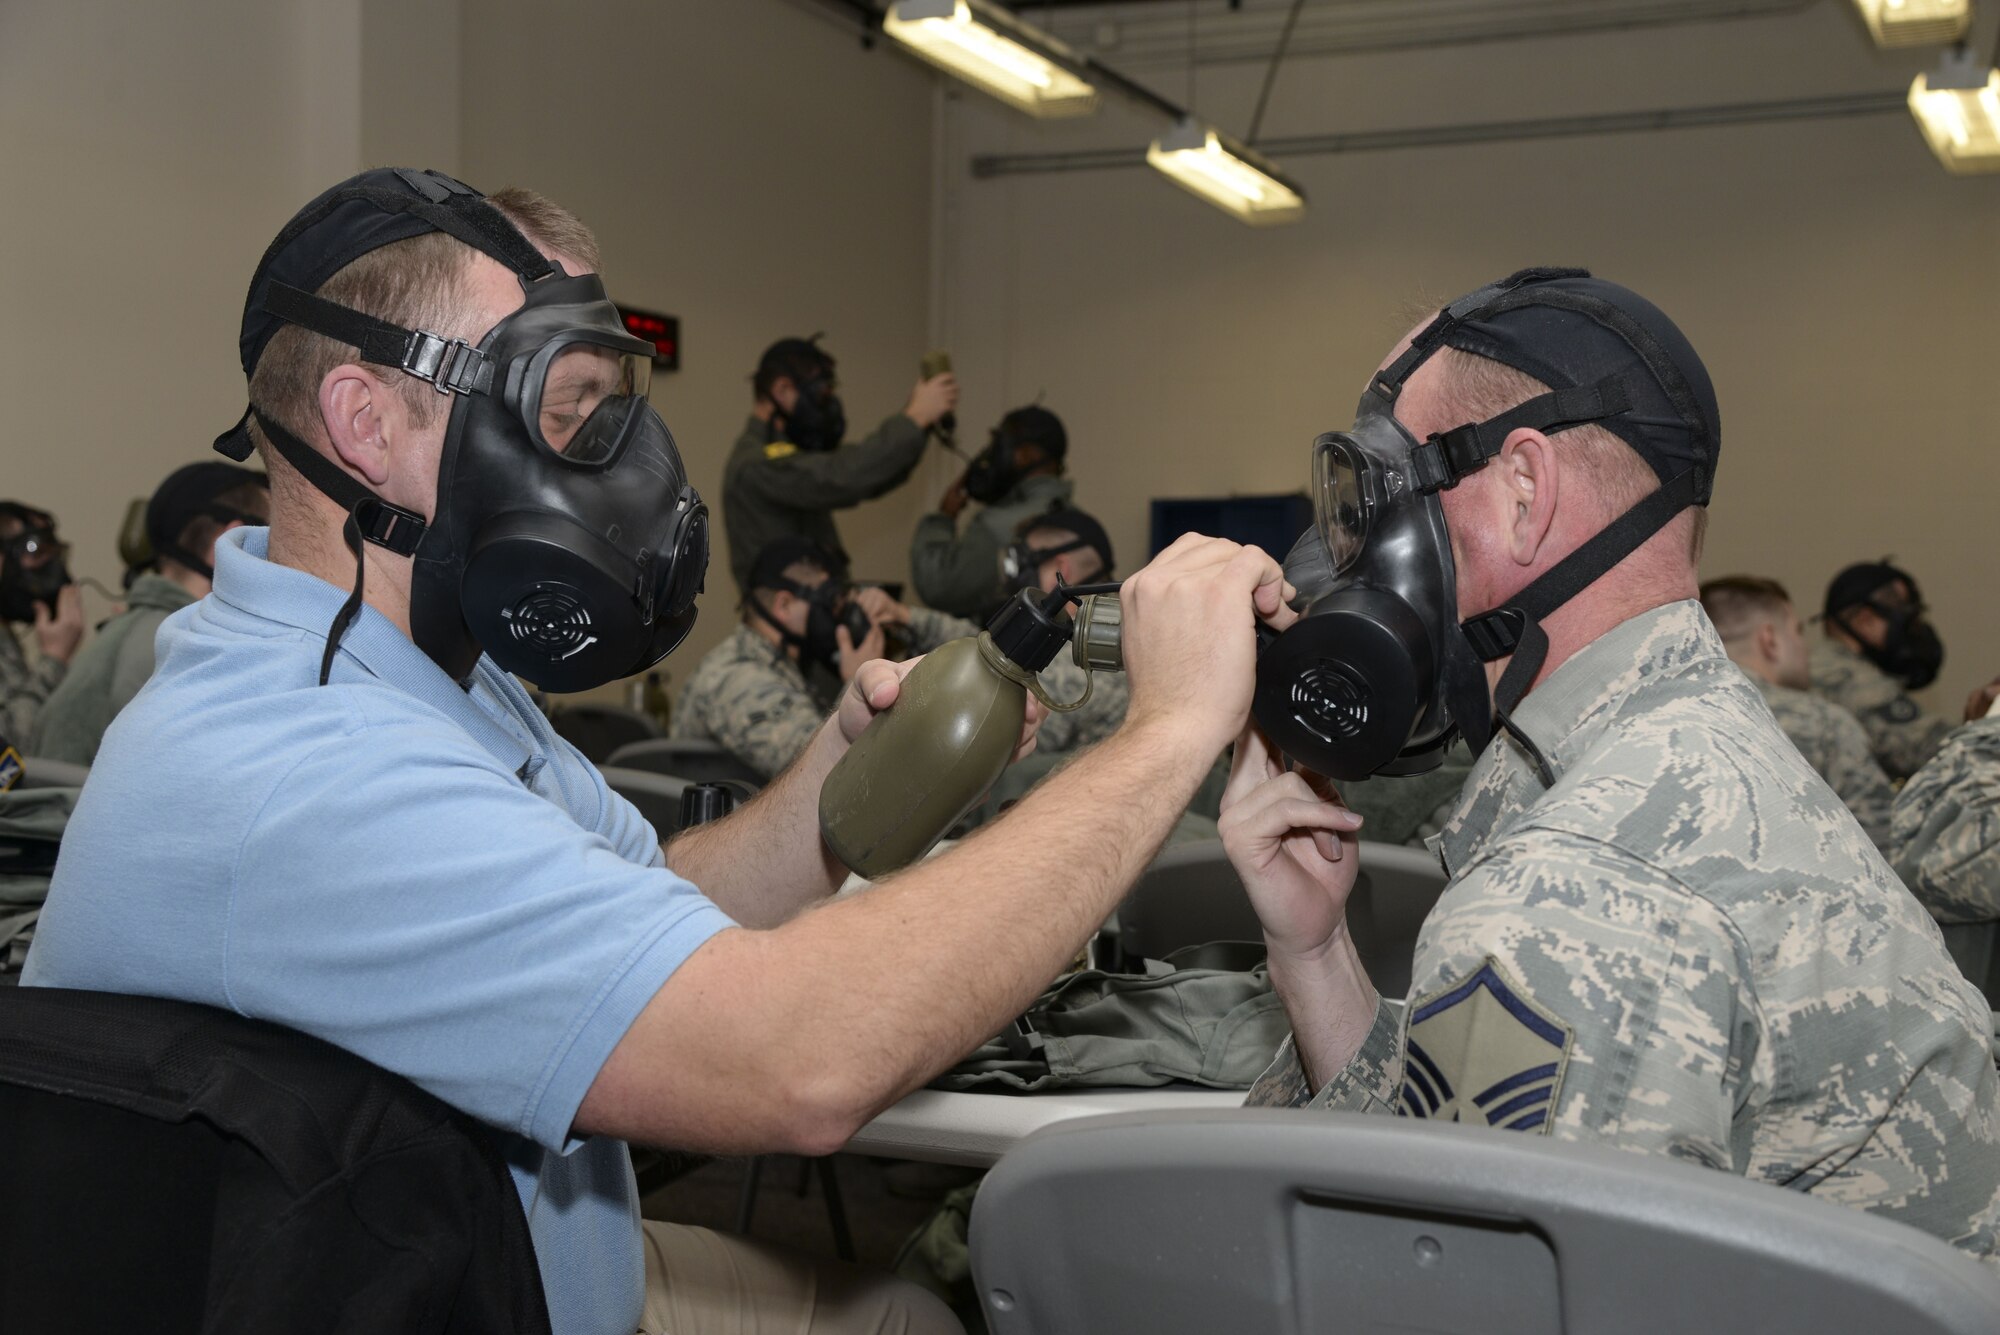 Investigator Michael Lawrence, 436th Security Forces Squadron NCO in charge of investigations and intelligence, and Master Sgt. Anthony Kinnick, 436th SFS chief of standards and evaluations, practice gas mask hydration during a Chemical, Biological, Radiological and Nuclear (CBRN) training session Jan. 31, 2018, at Dover Air Force Base, Del. During a CBRN event, Mission Oriented Protective Posture, or MOPP gear, cannot be removed, so drinking is accomplished through a special port on the gas mask. (U.S. Air Force photo by Staff Sgt. Aaron J. Jenne)